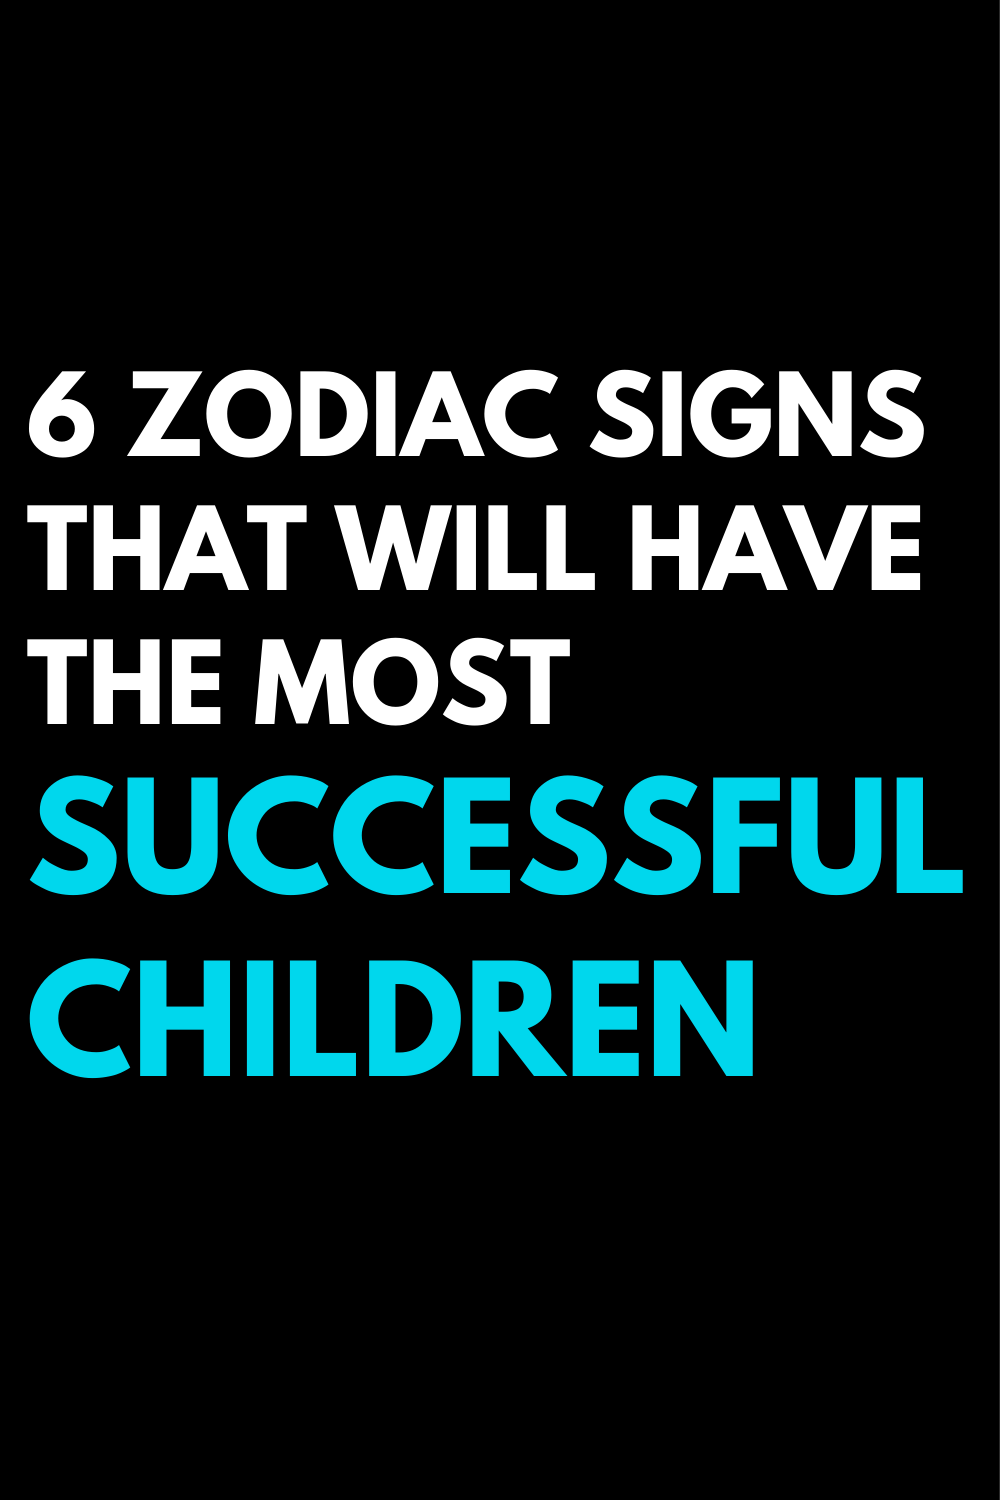 6 zodiac signs that will have the most successful children